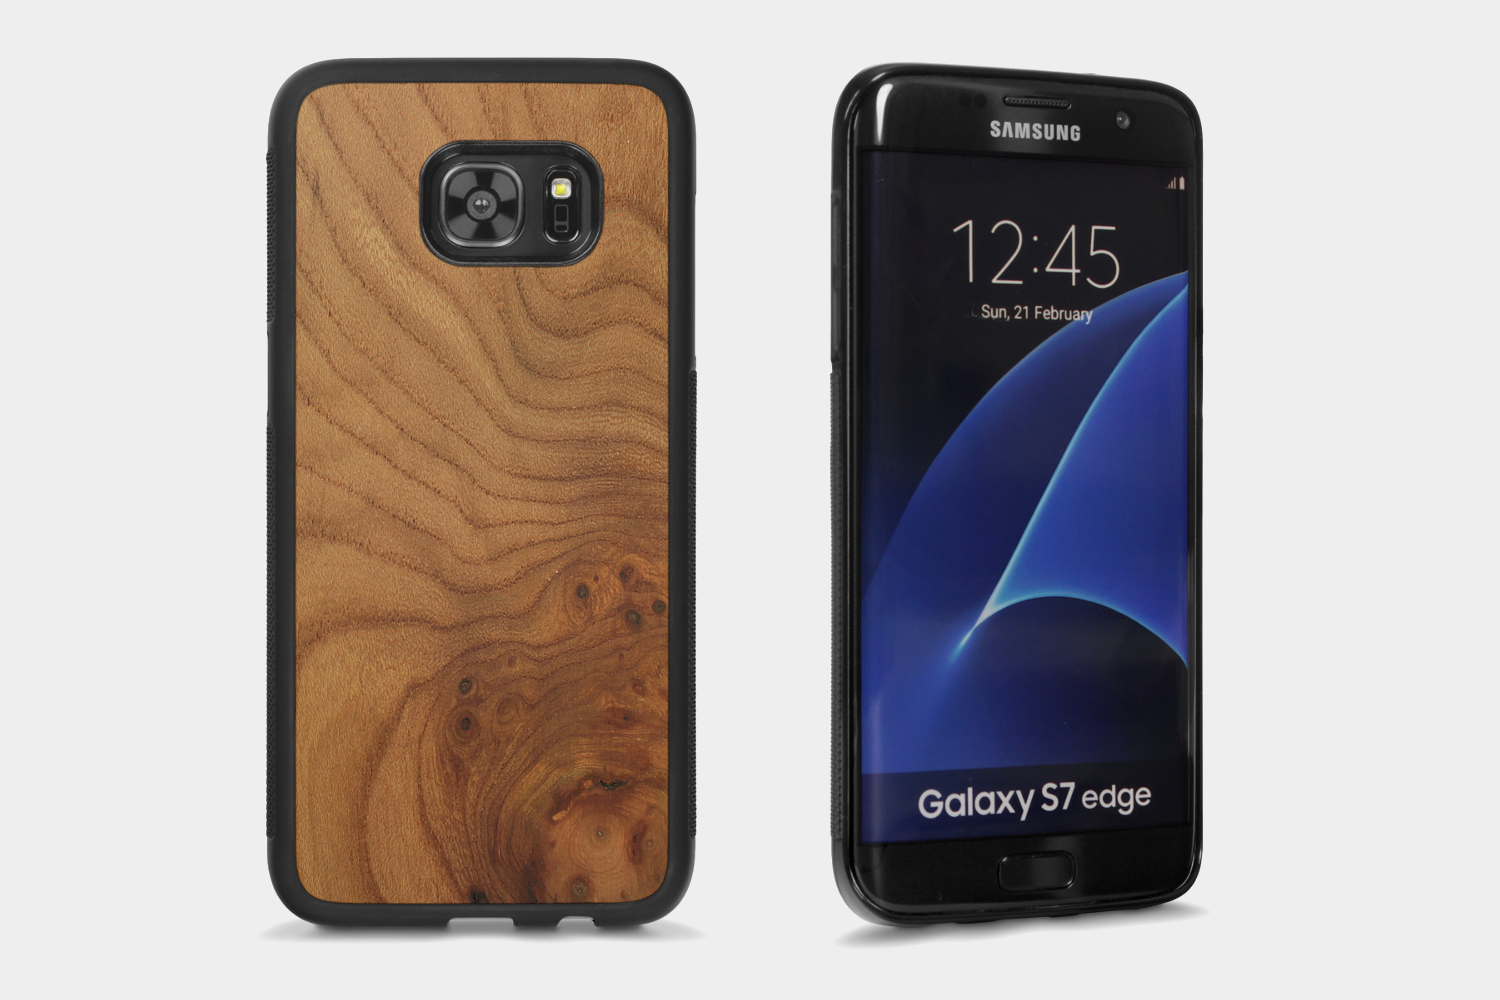 Koel Lima bubbel The Best Samsung Galaxy S7 Edge Cases | Digital Trends